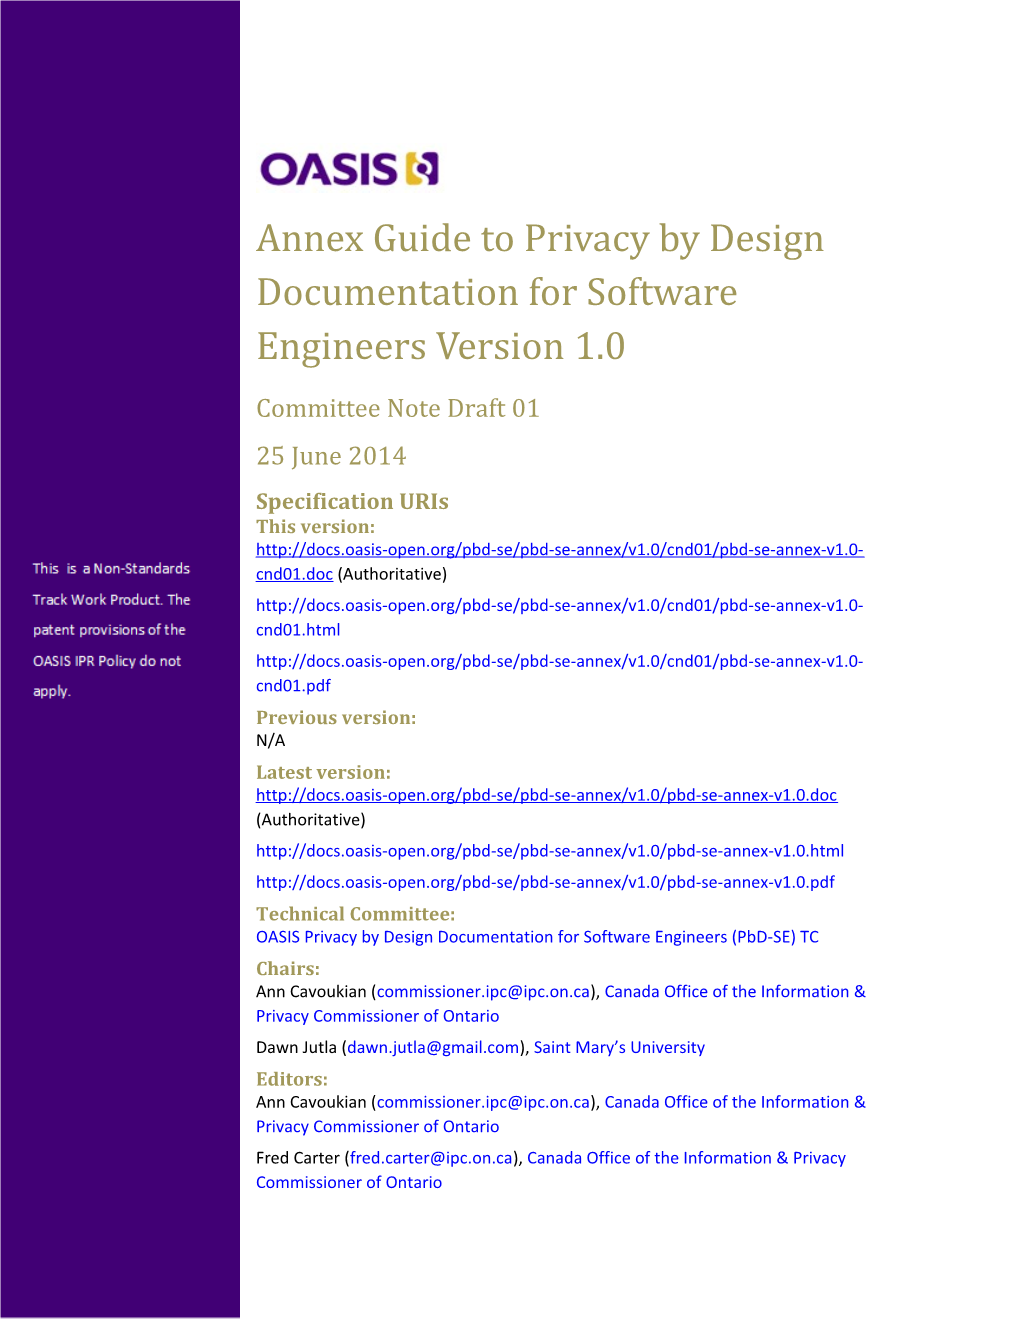 Annex Guide to Privacy by Design Documentation for Software Engineers Version 1.0